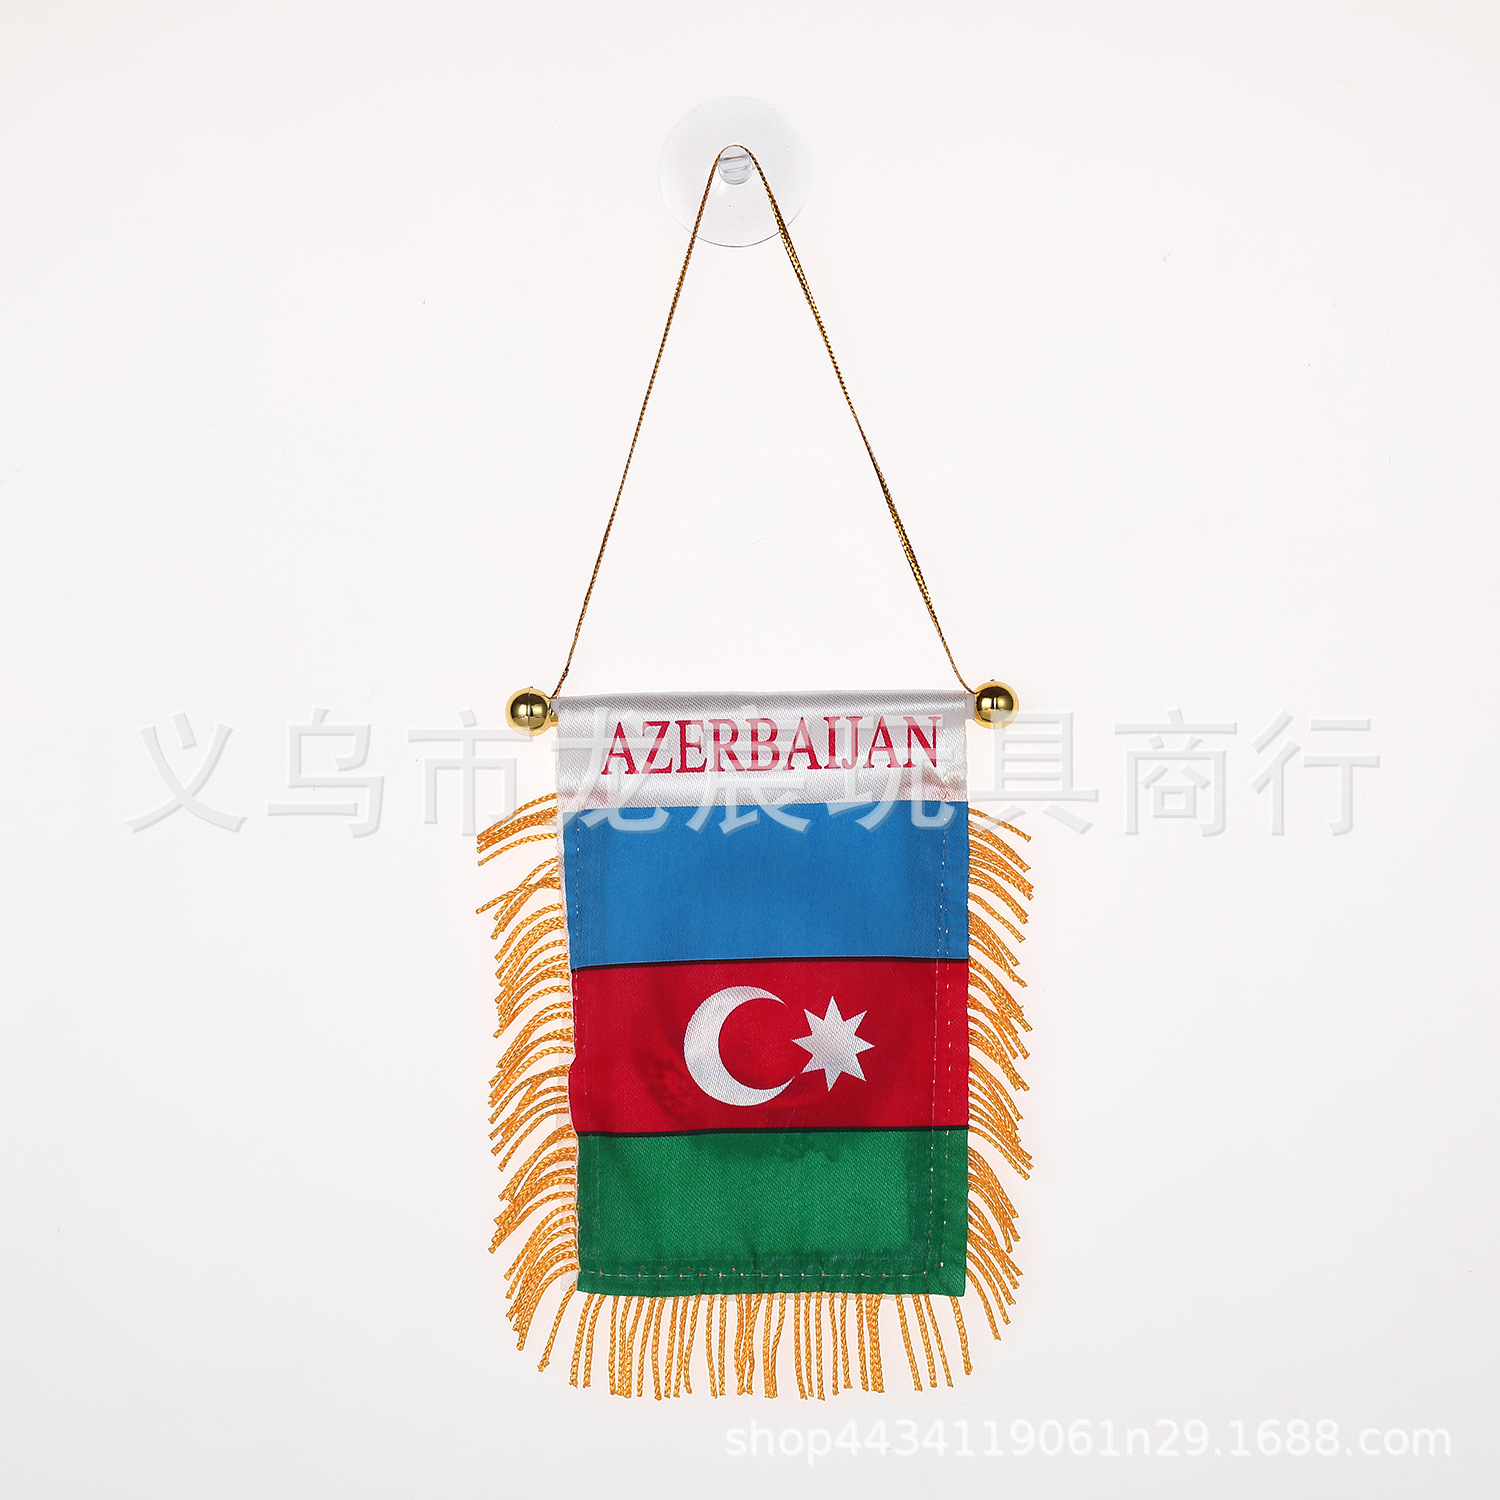 Azerbaijan Car Small Hanging Flag National Flag Mini Small Brocade Flag Double-Sided Tassel with Suction Cup Fringe Flag Wholesale